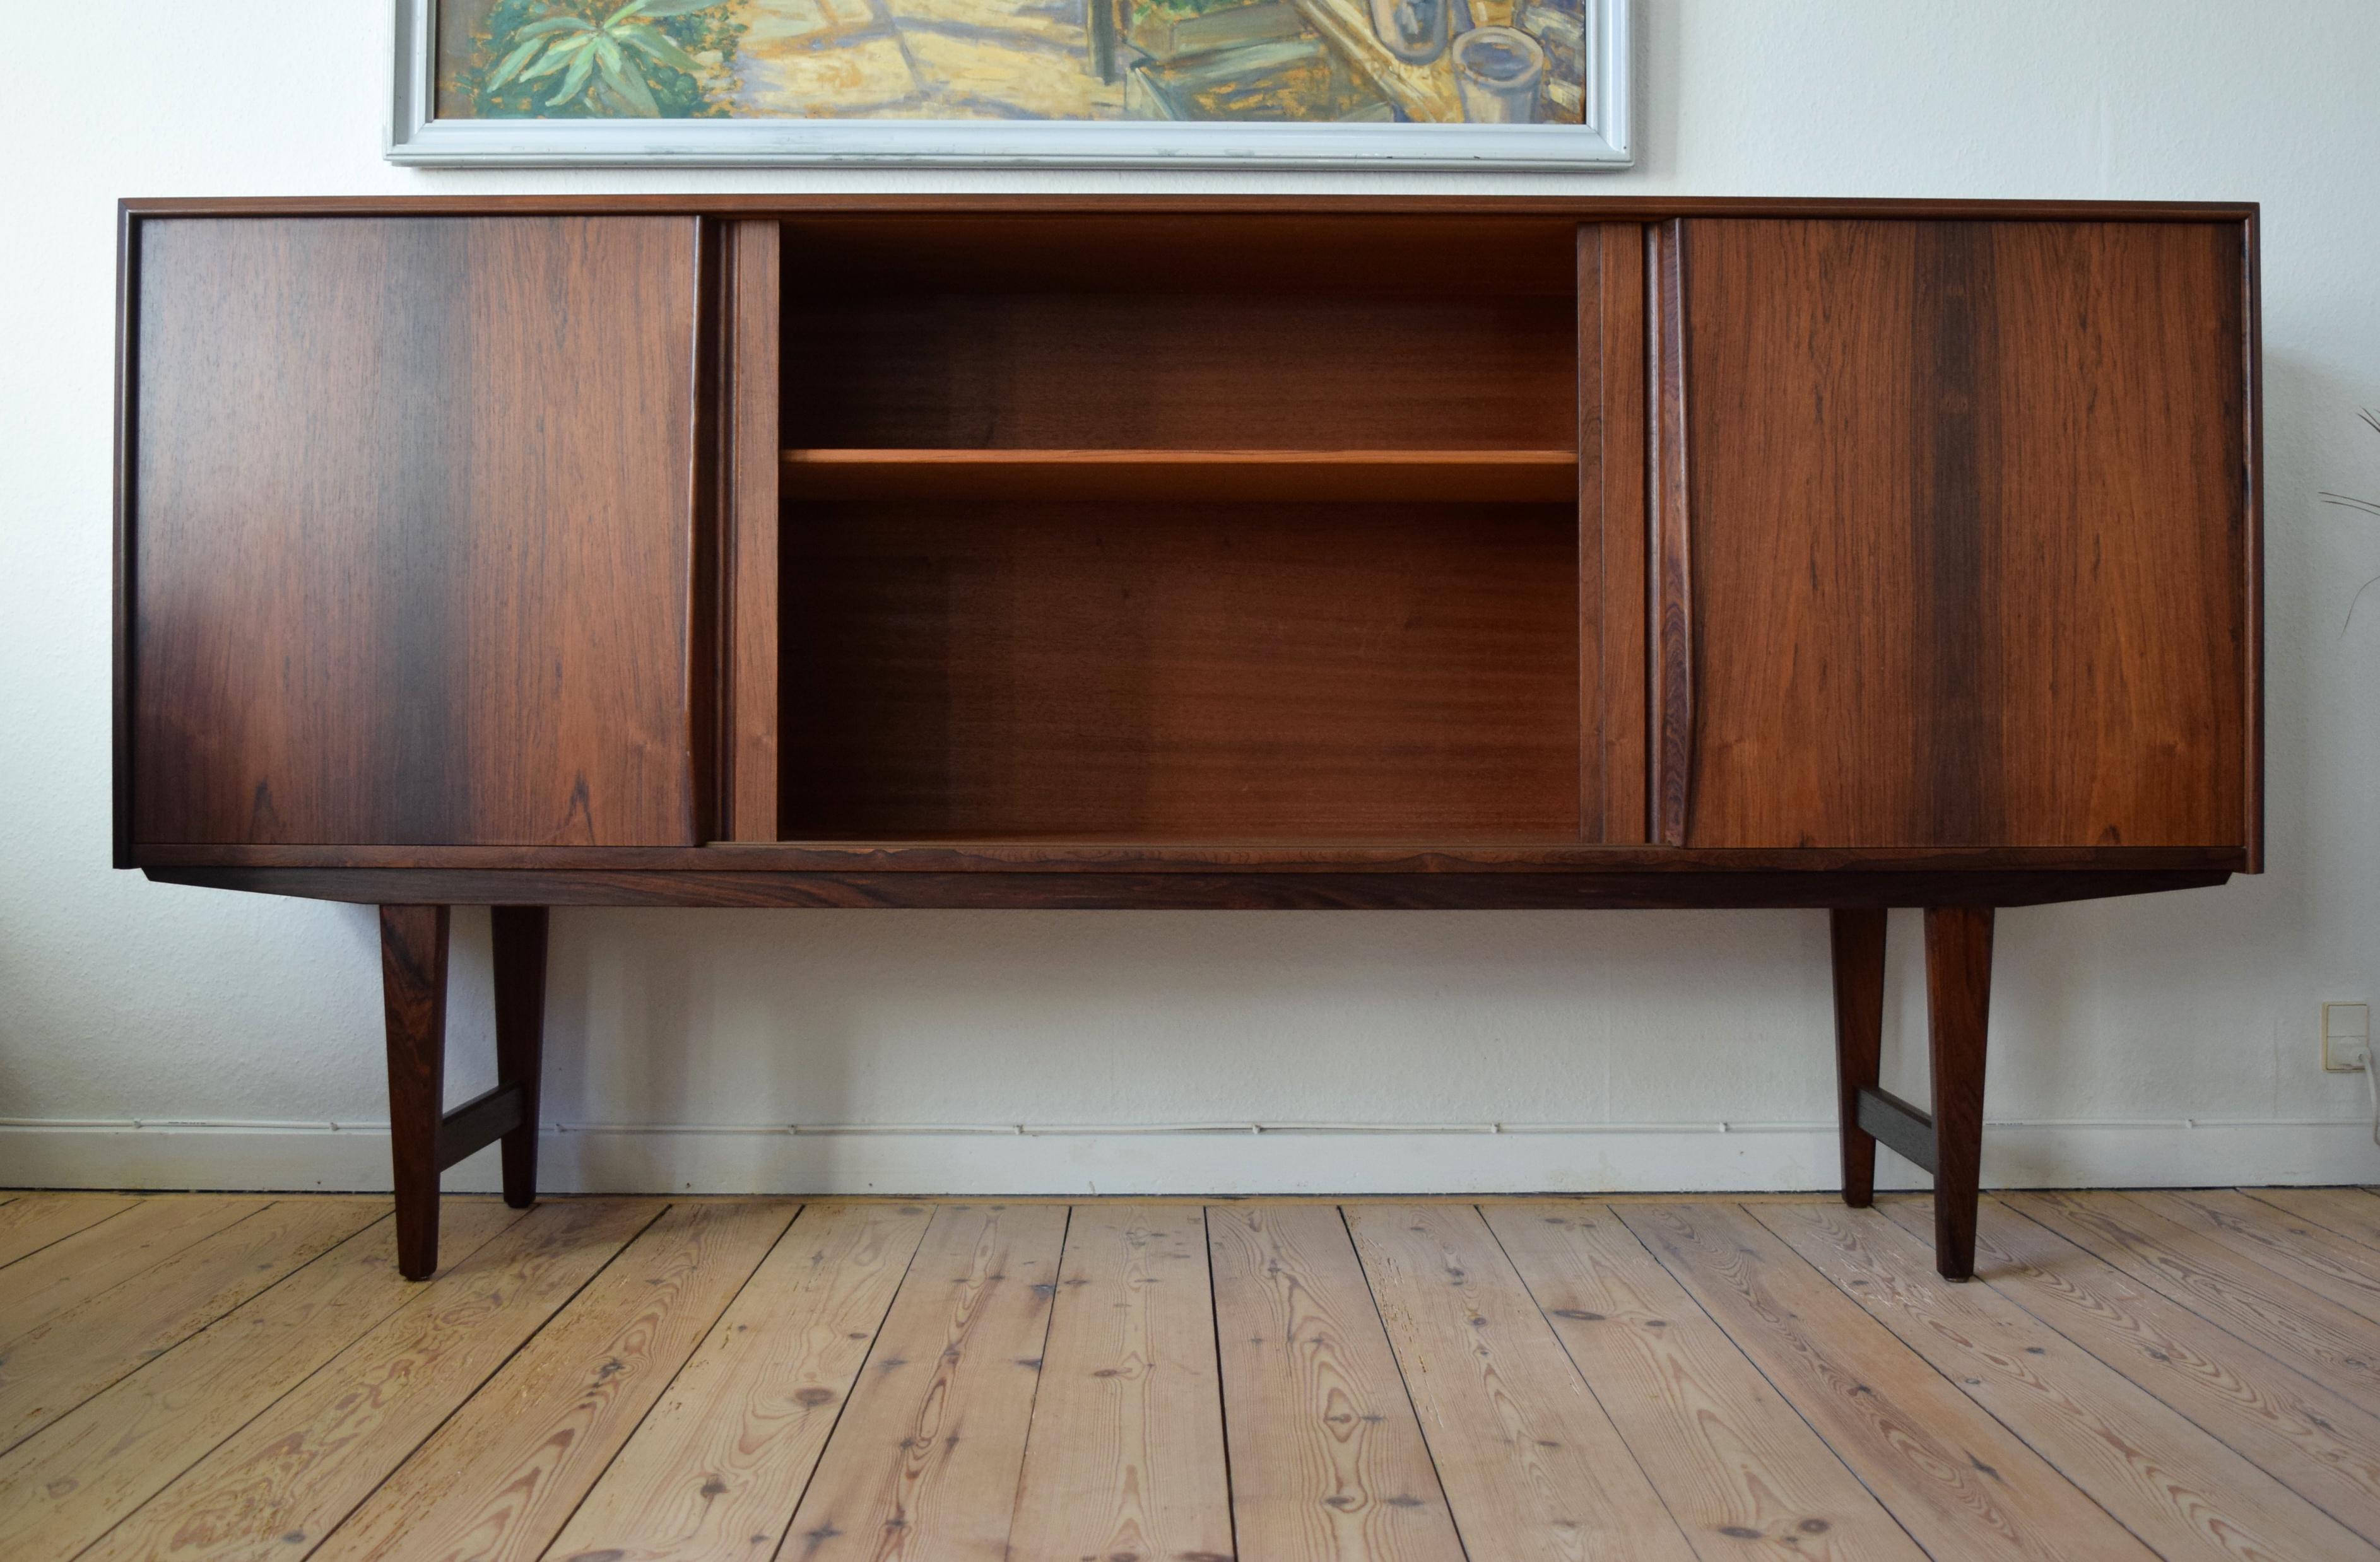 Brazilian rosewood low sideboard designed by E.W. Bach manufactured by Sejling Skabe in Denmark in the 1960s. Four smooth sliding doors on the front with three internal compartments with shelves. The right compartment has a bar section with mirror